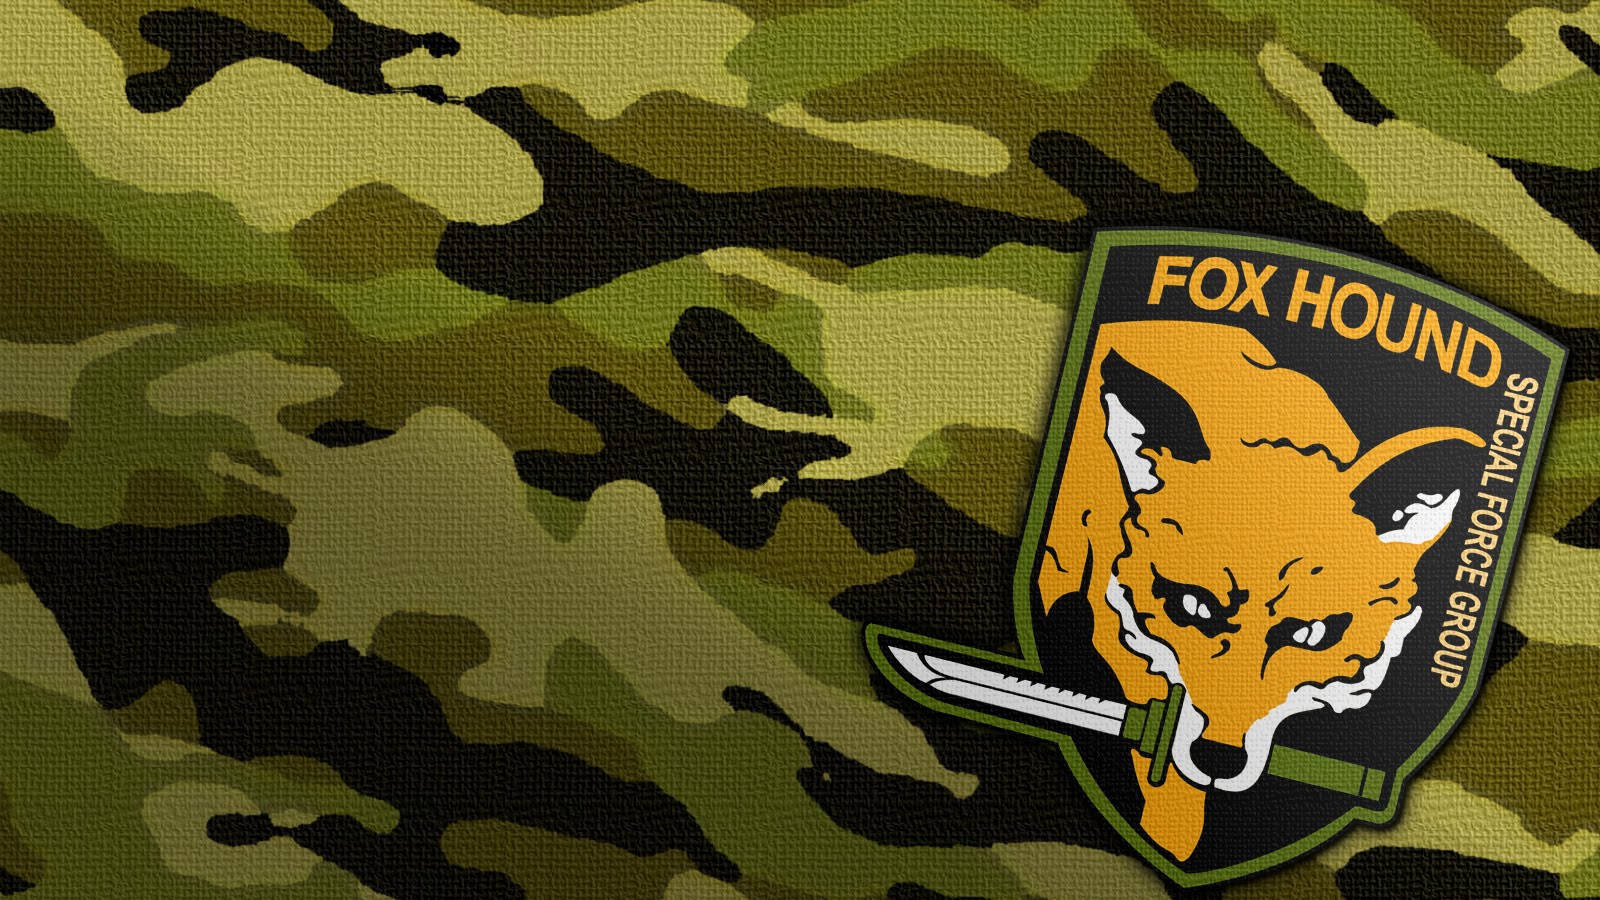 Specialforces Mgs Foxhound